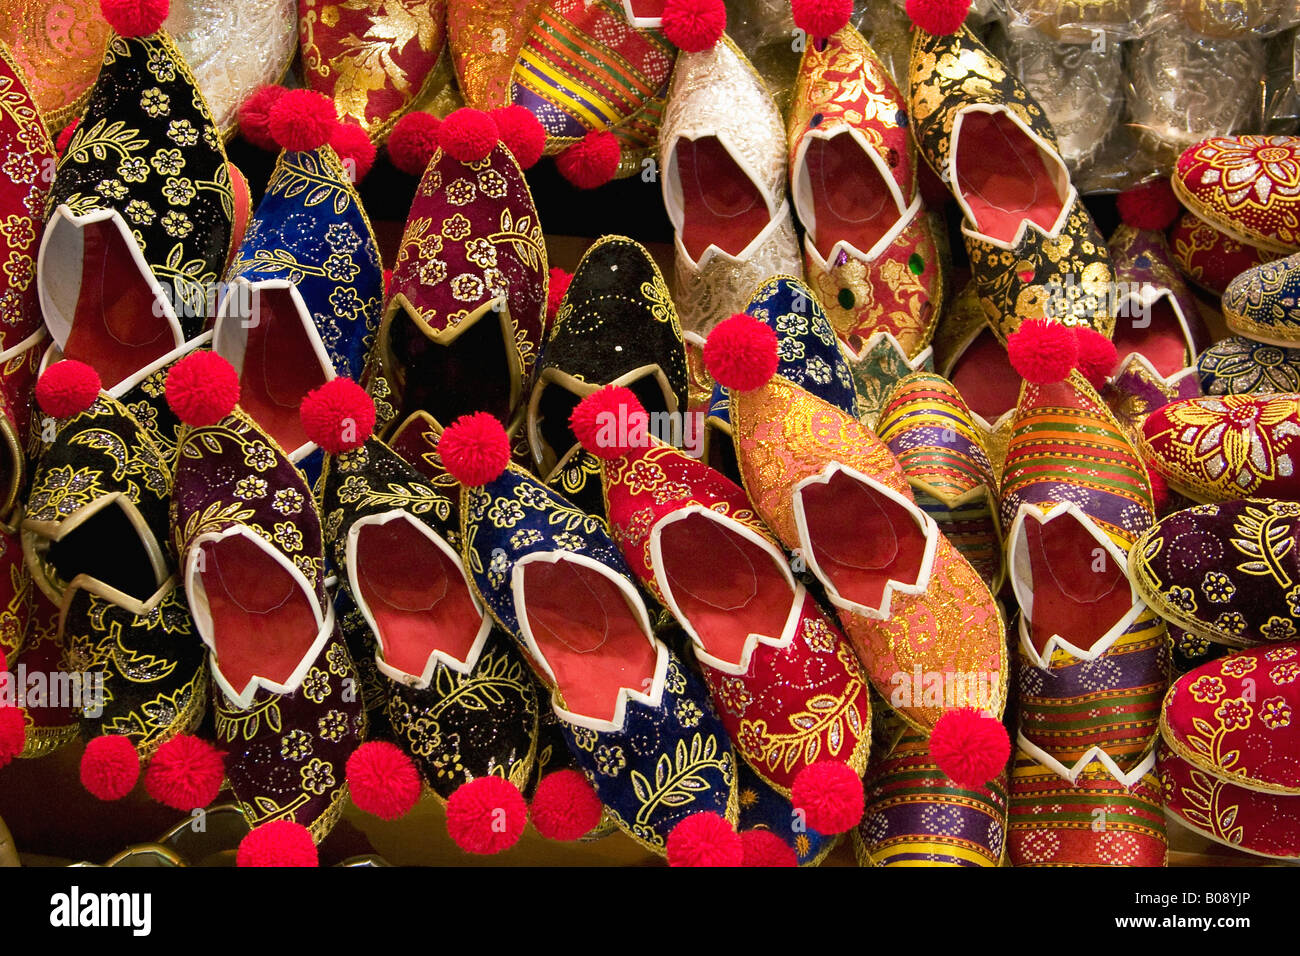 Brightly embroidered oriental shoes with red pom-poms displayed at the Grand Bazaar, Istanbul, Turkey Stock Photo